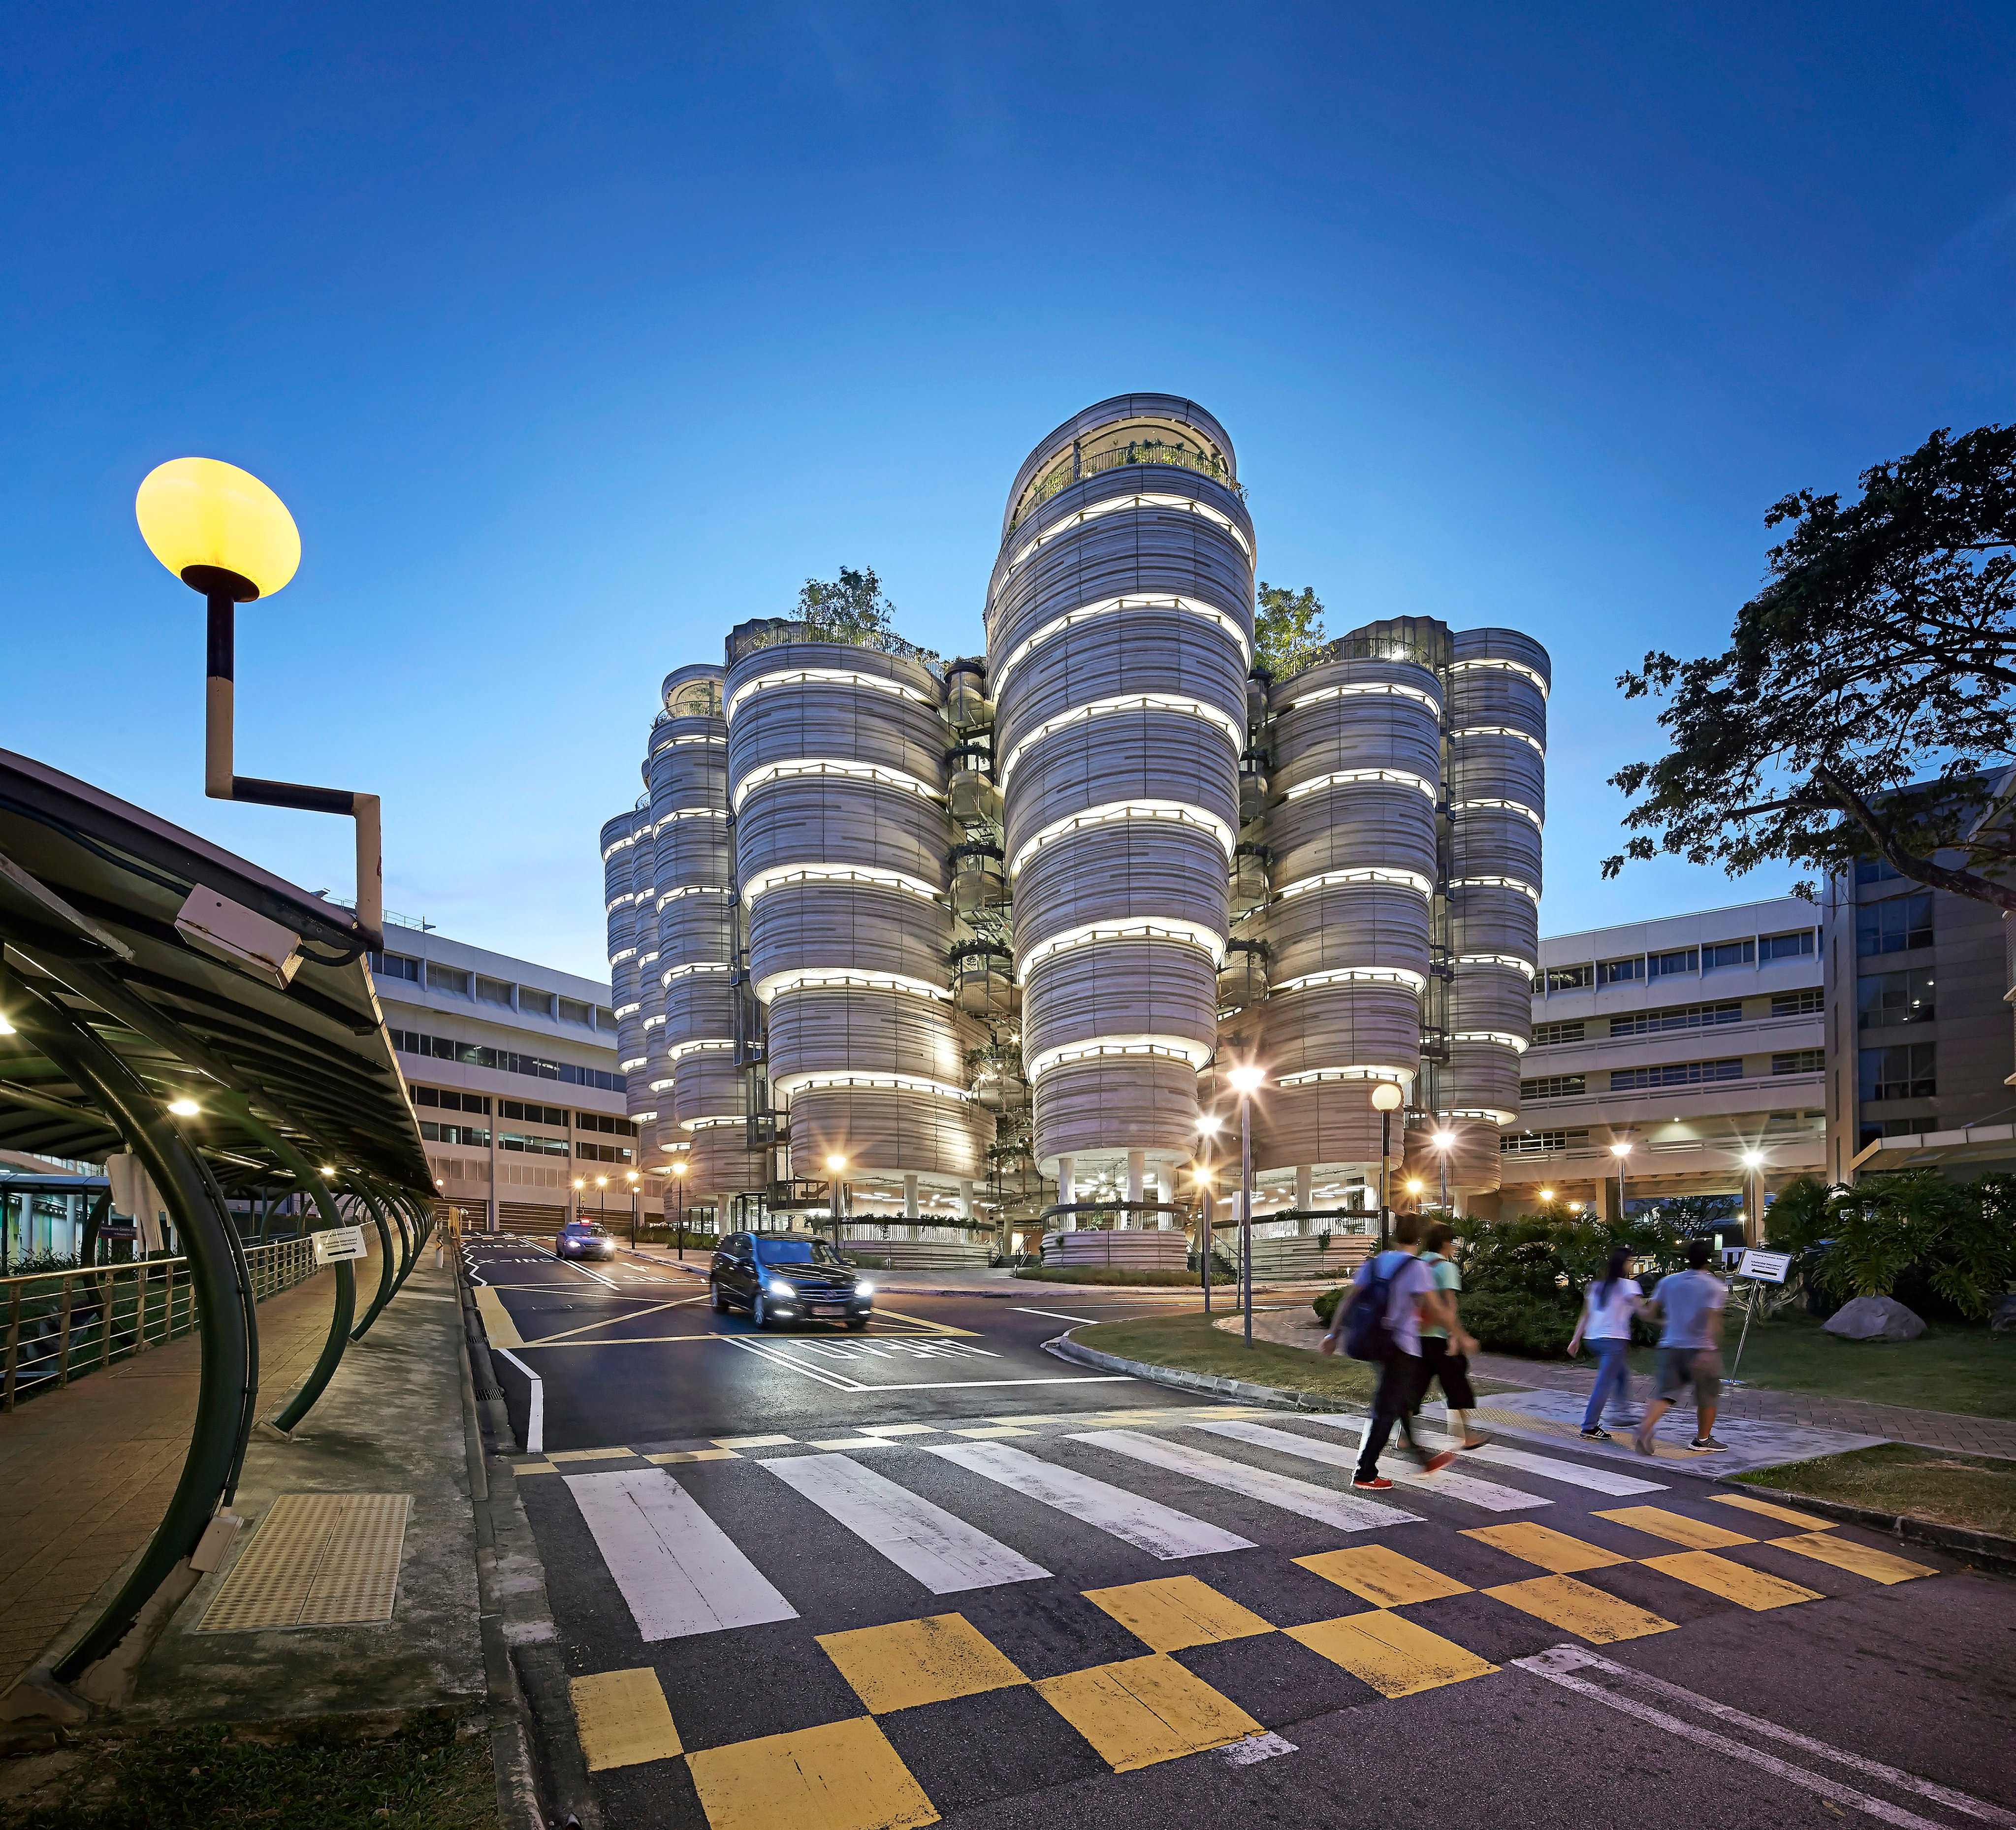 The Hive learning hub at Nanyang Technological University in Singapore. Photo: Universal Images Group via Getty Images